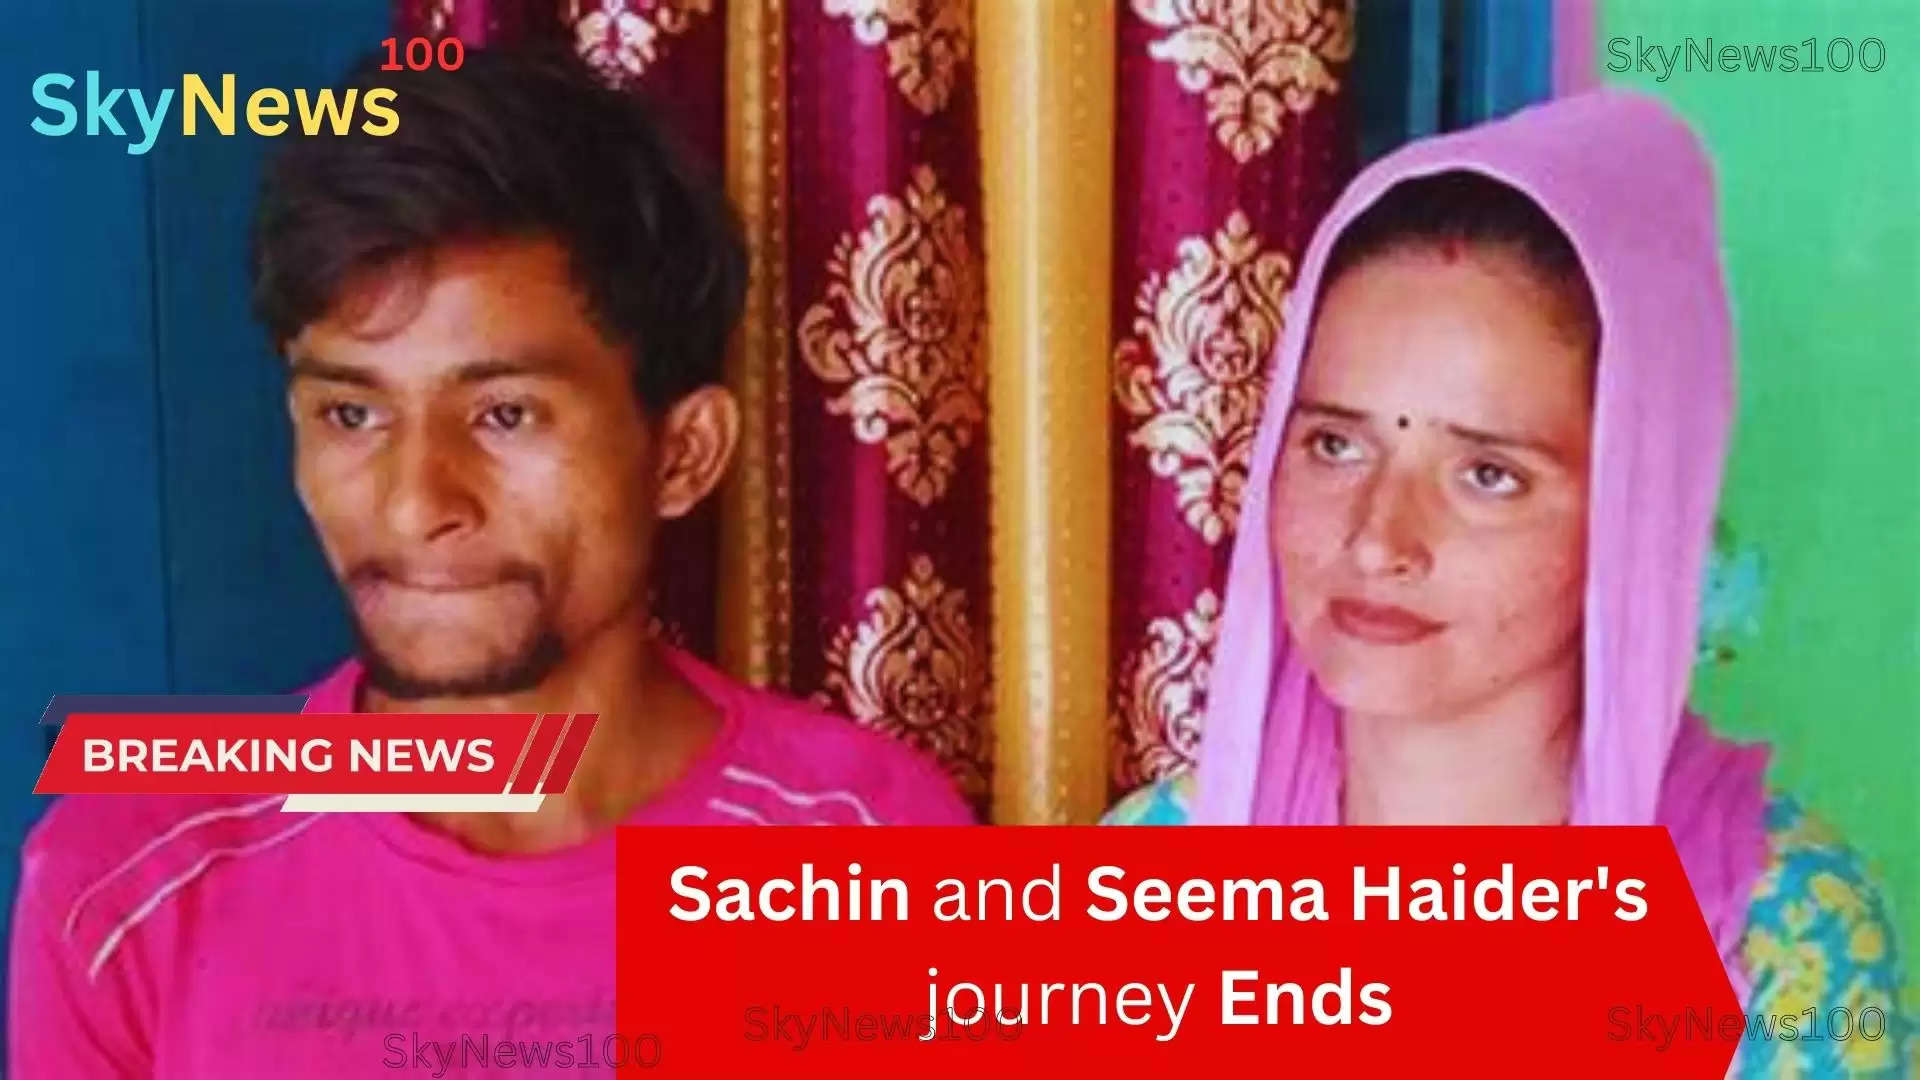 Sachin and Seema Haider's journey ends